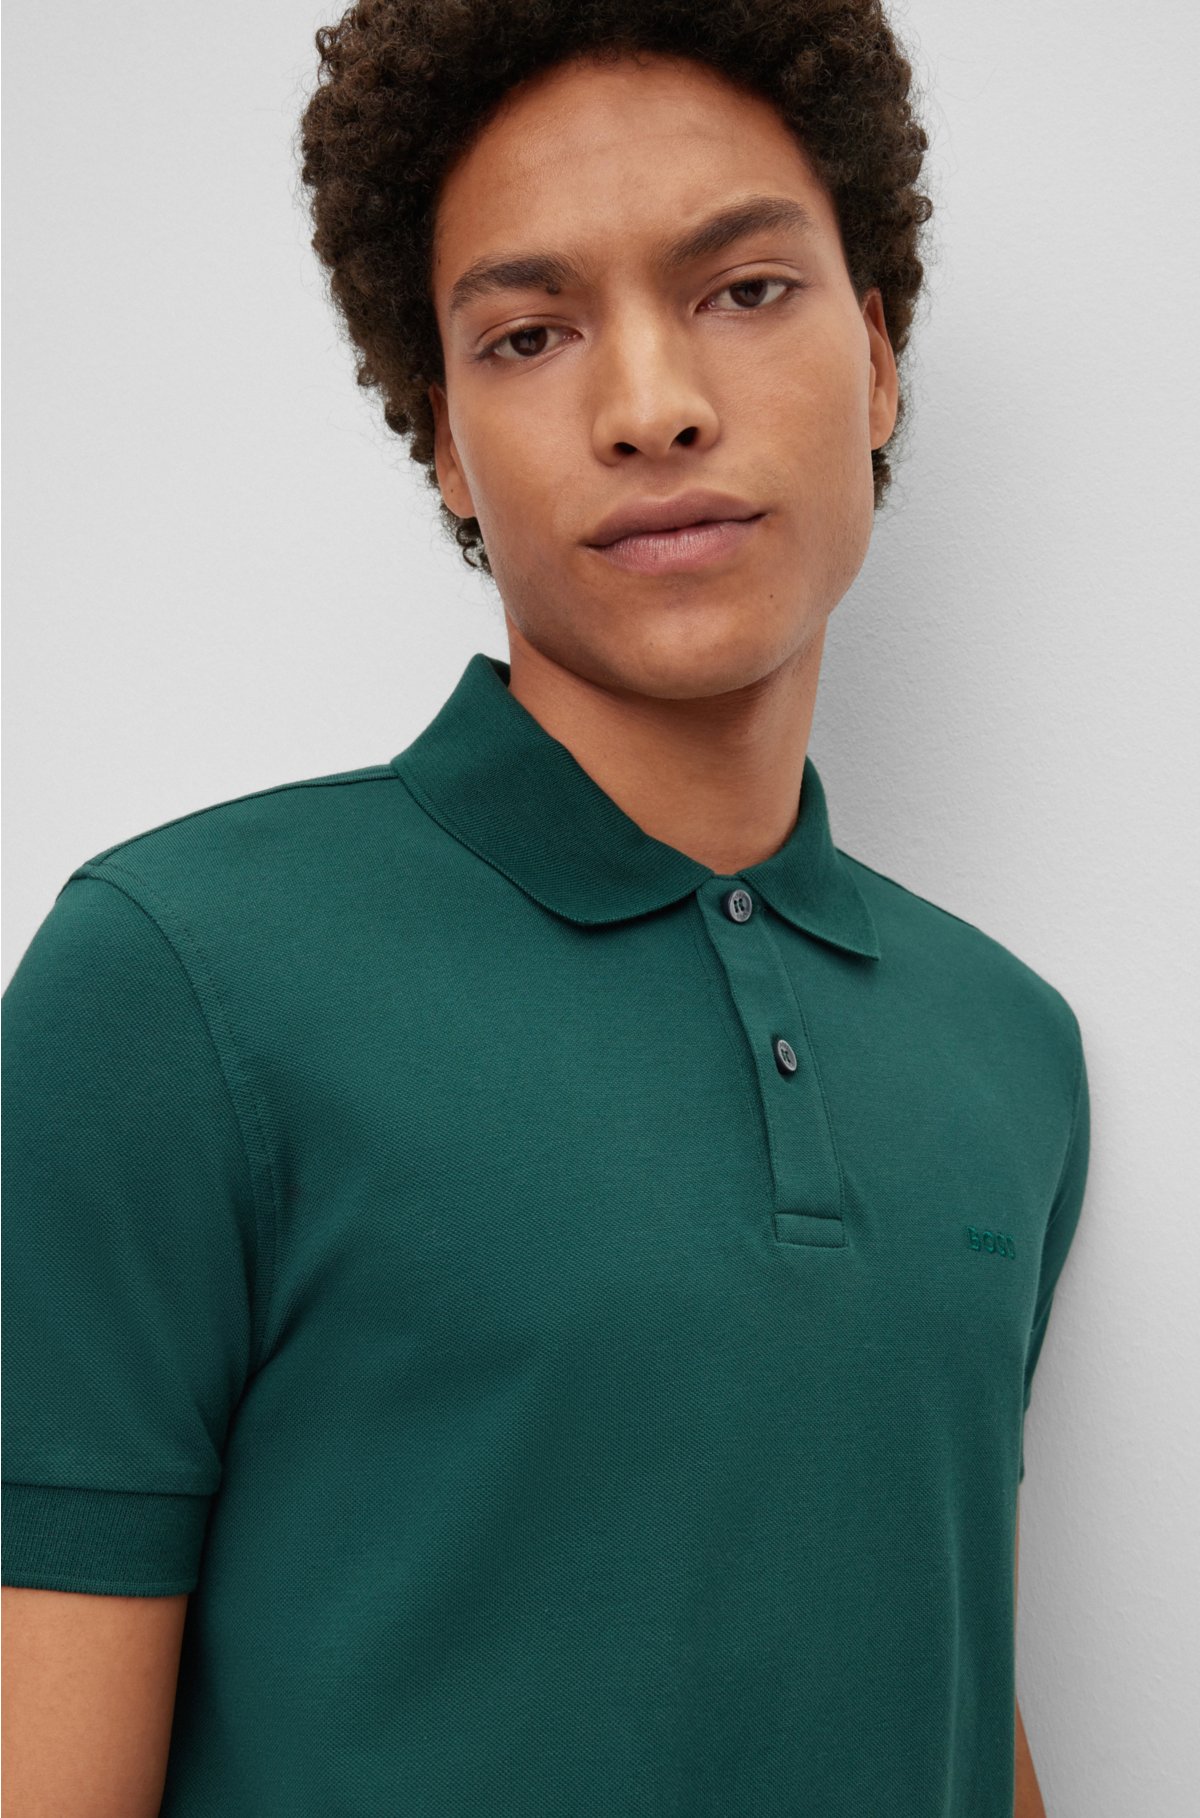 embroidery - shirt with BOSS logo polo Regular-fit